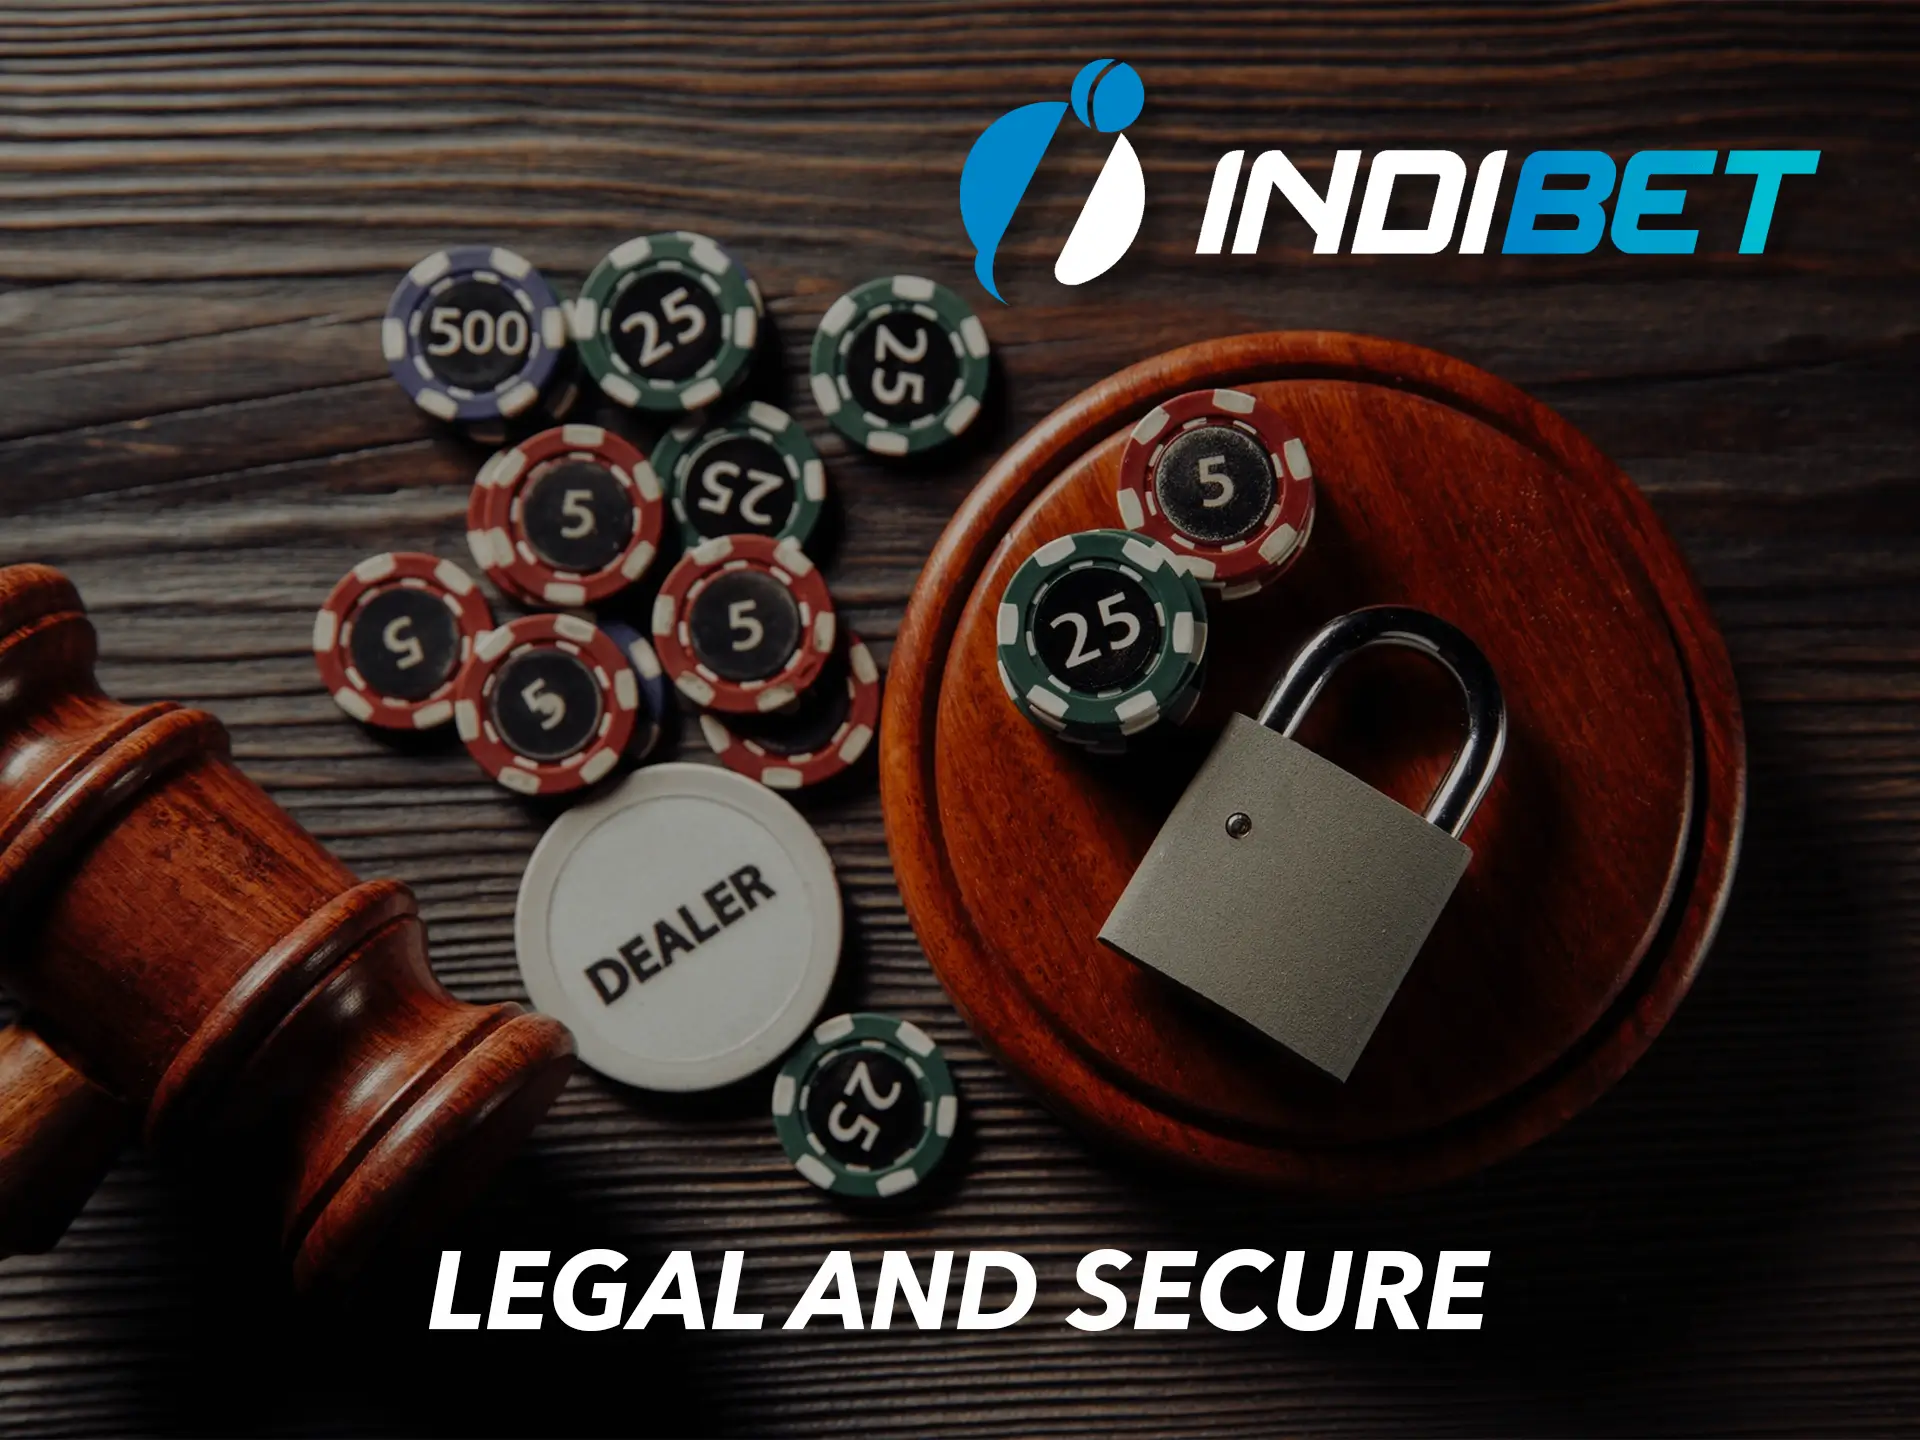 Indibet operates under a reputable licence and so users can rest assured that their data is protected.